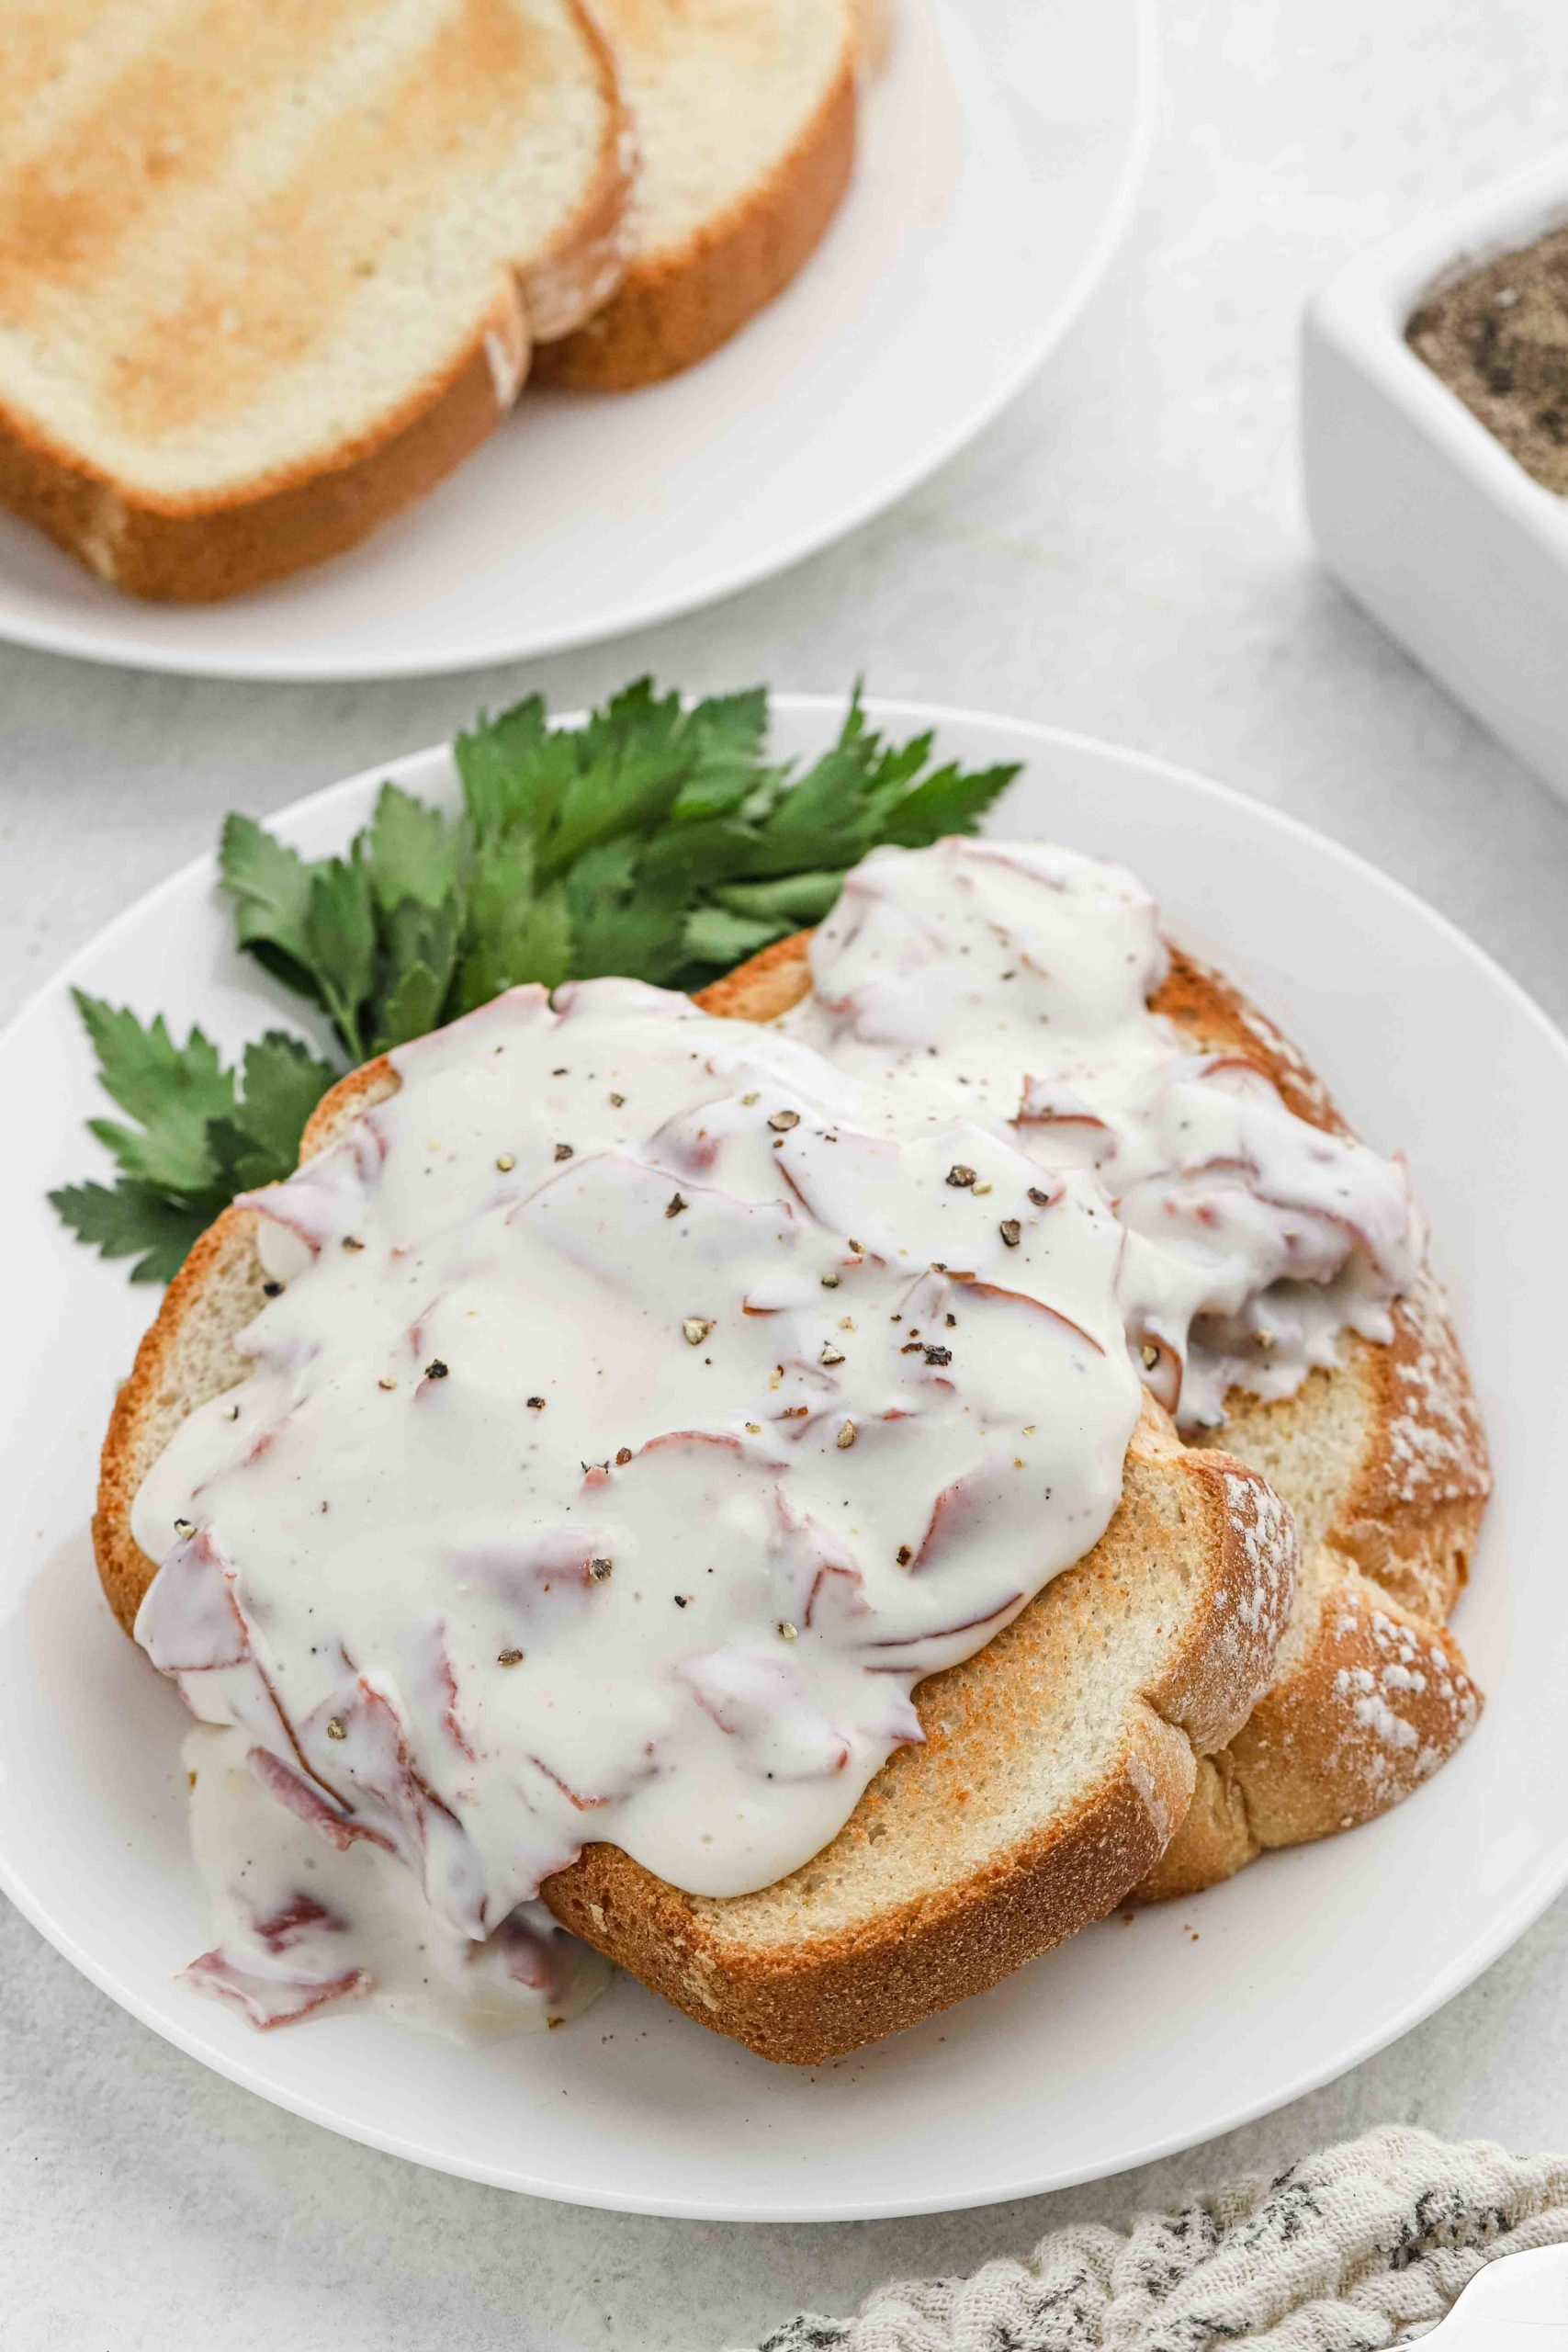 chipped beef gravy on toast, served on a plate.